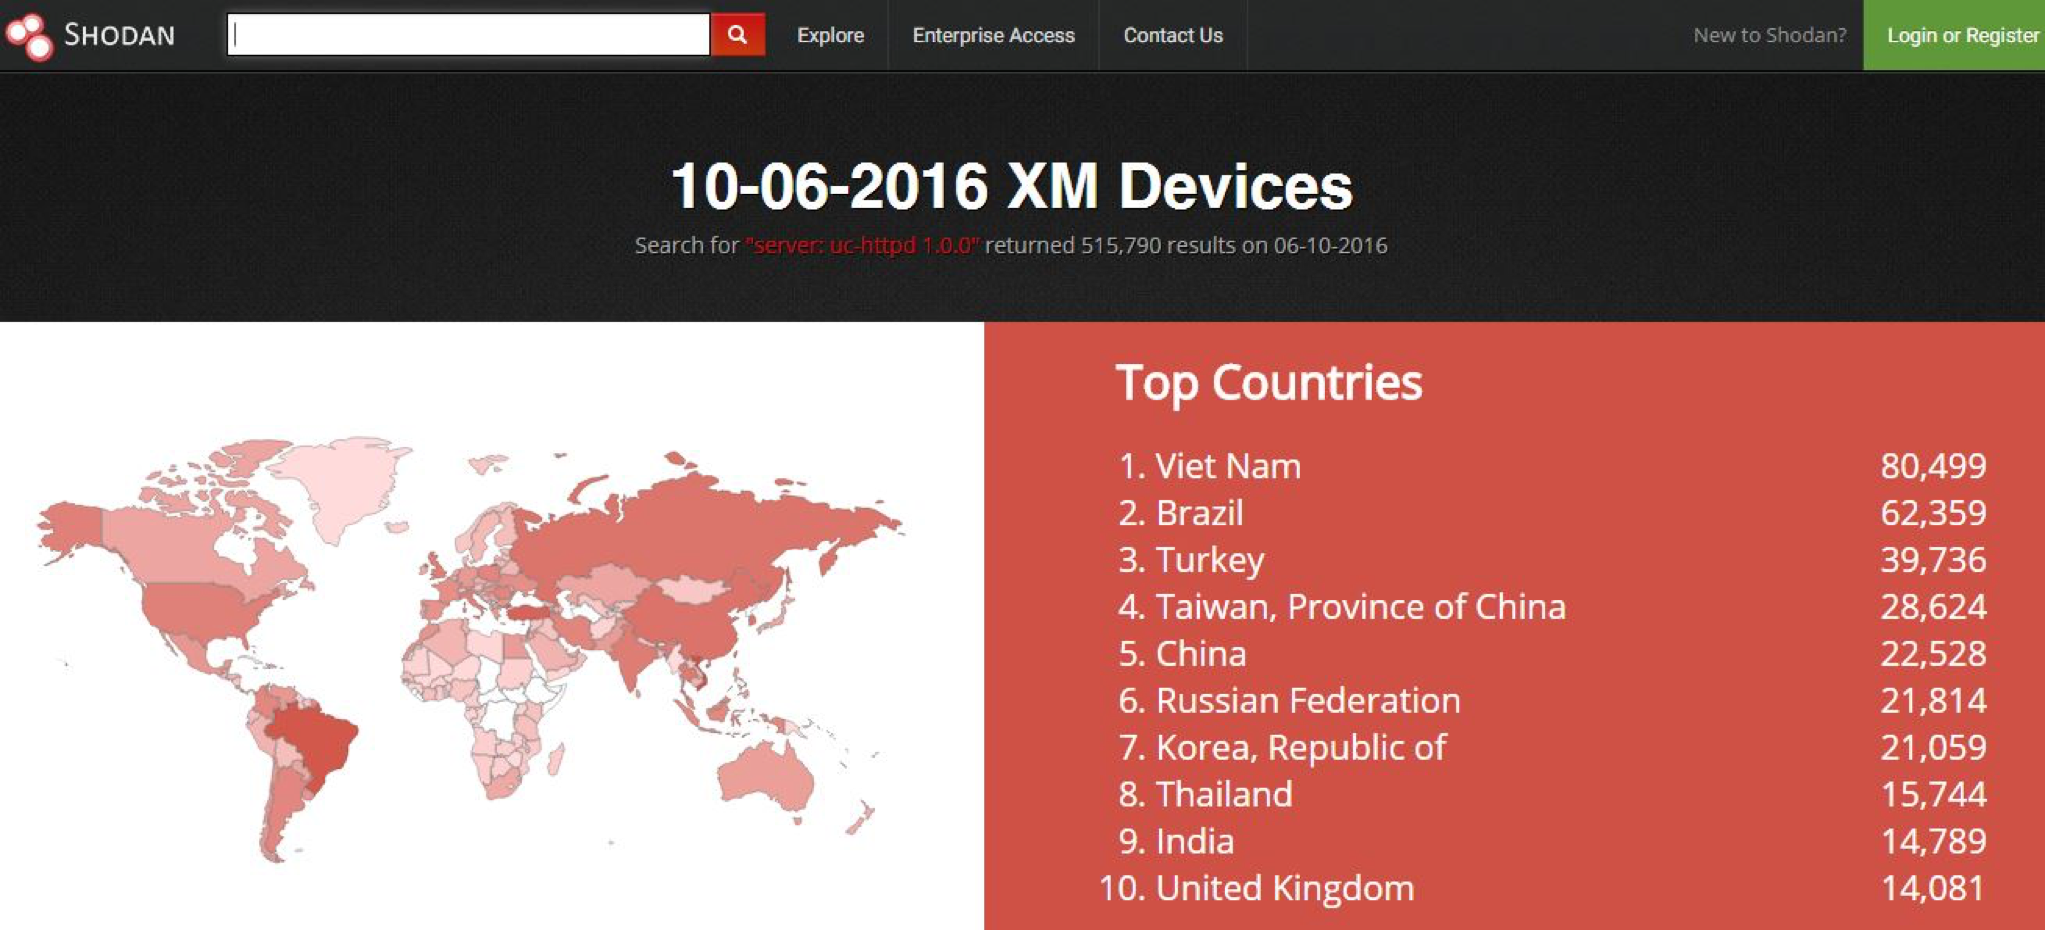 More than 500,000 IoT devices potentially recruitable in the Mirai Botnet